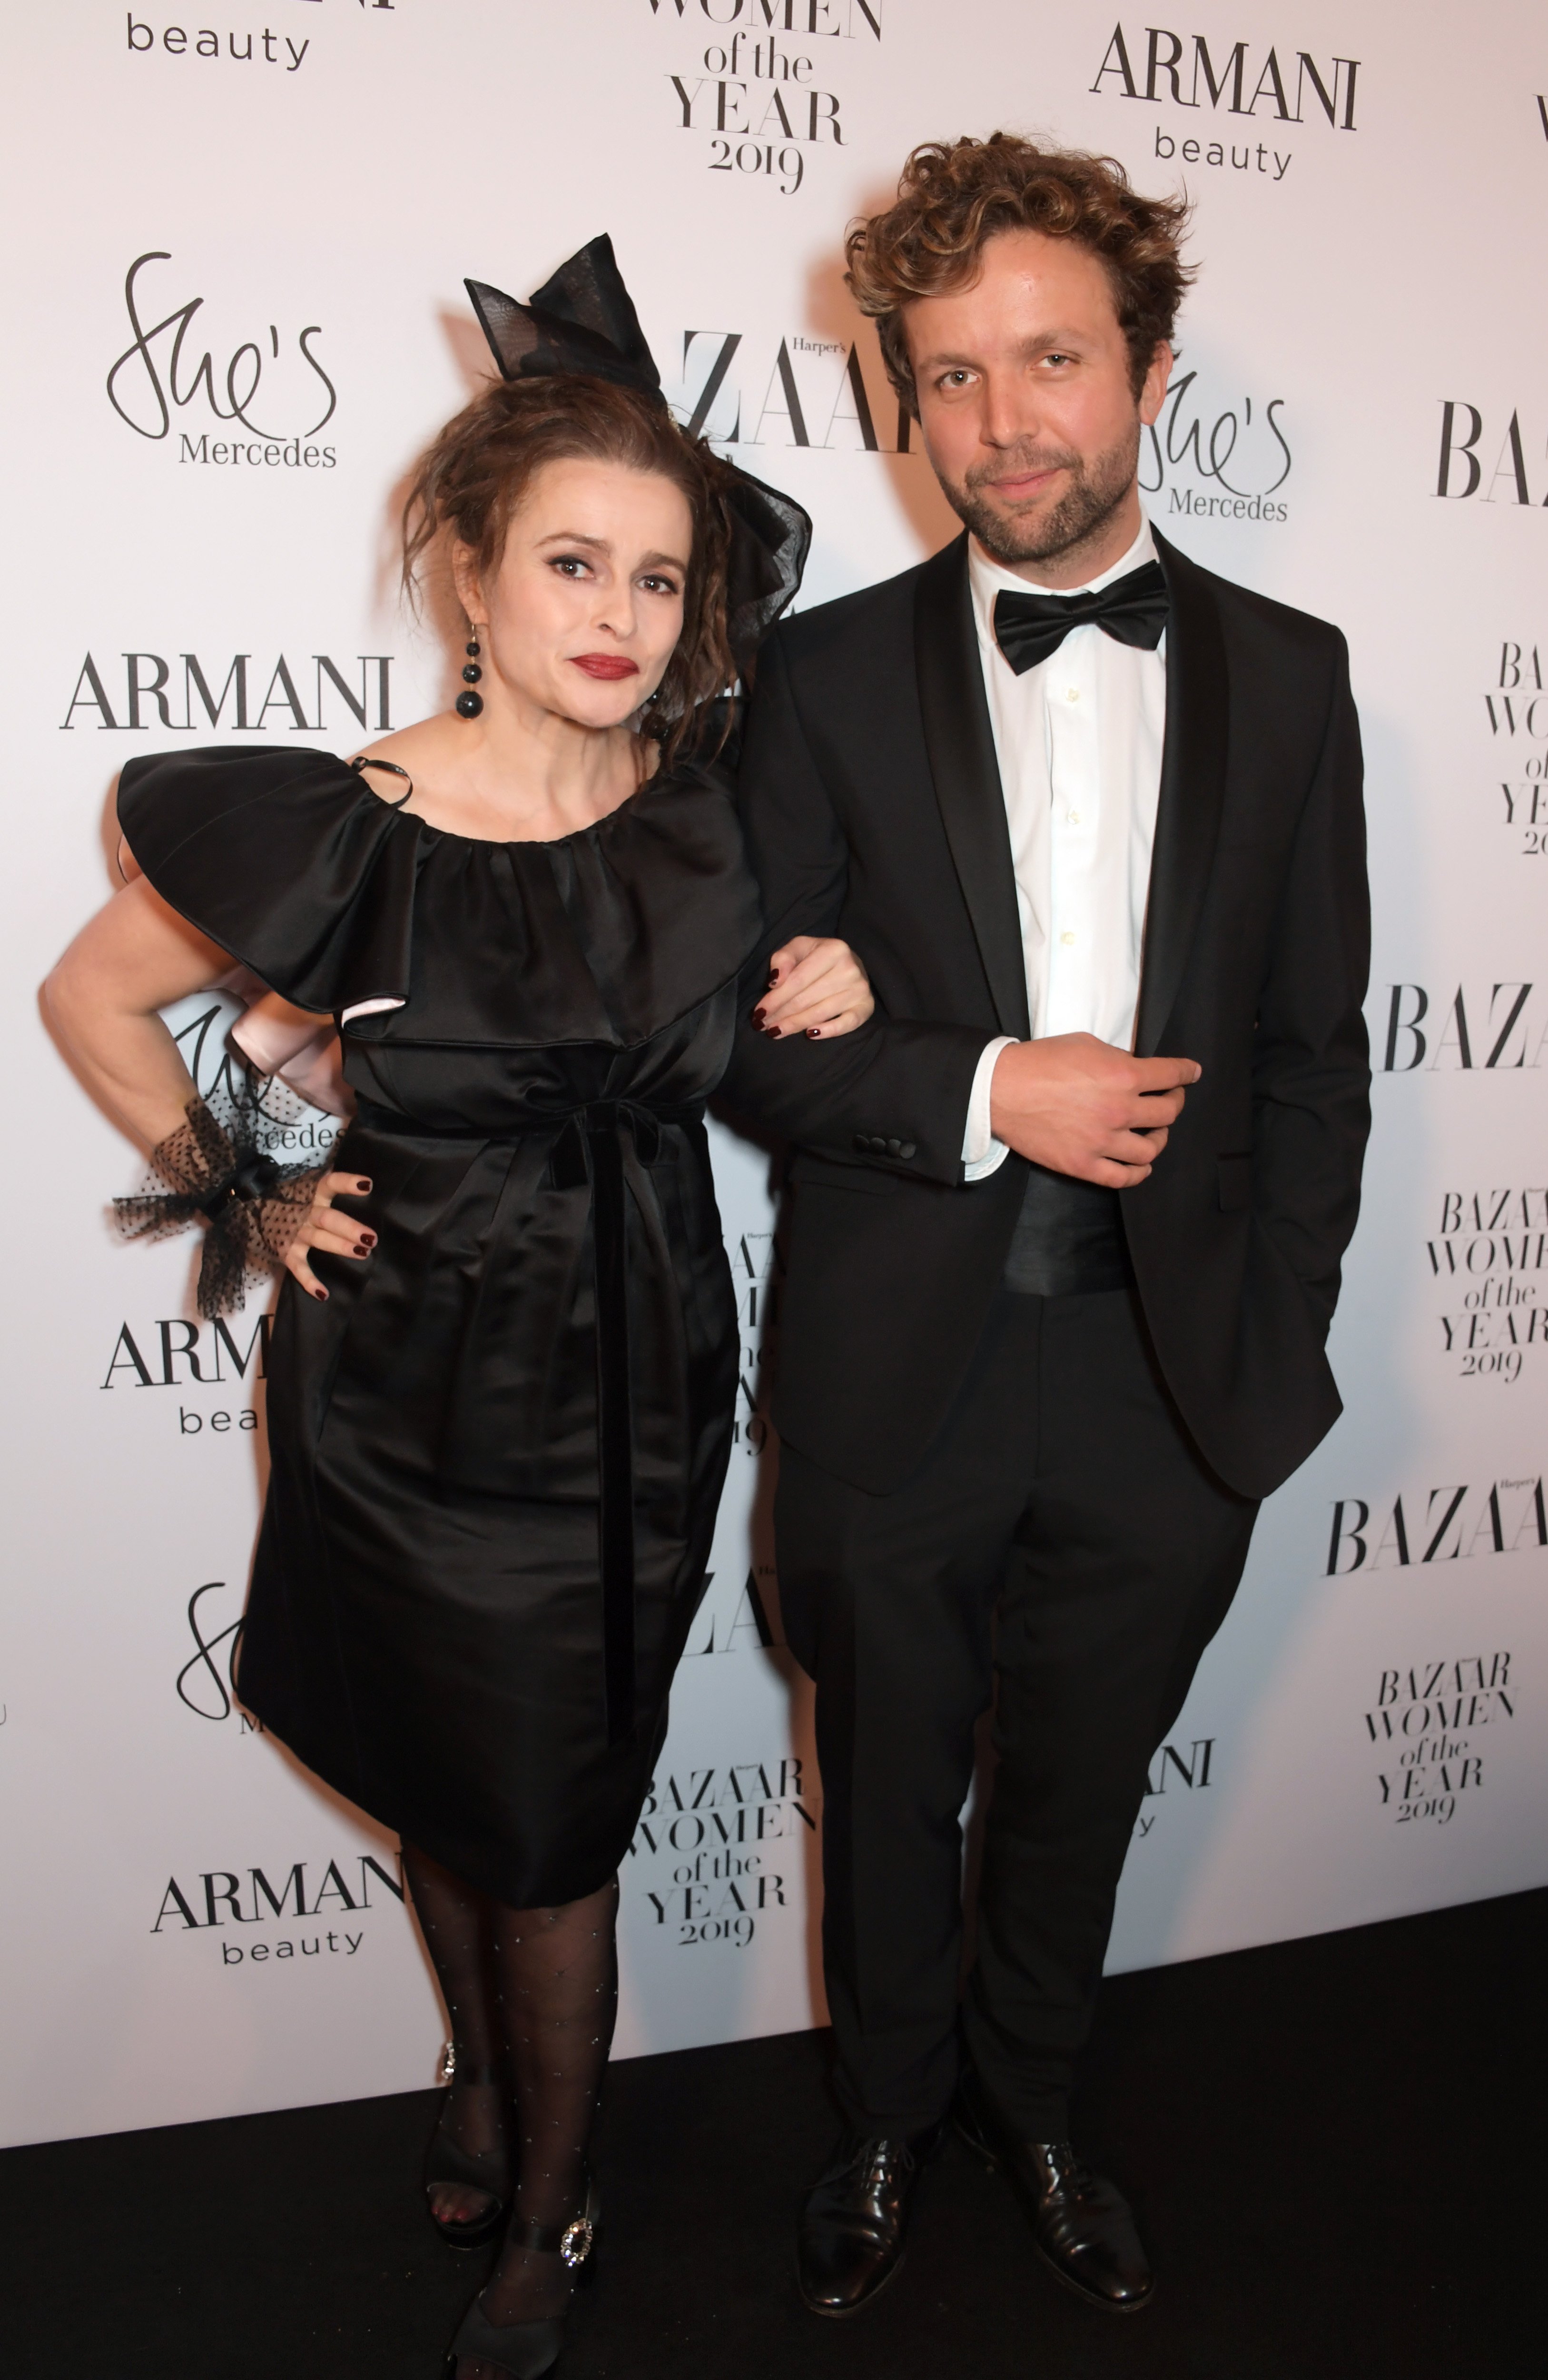 Helena Bonham Carter and Rye Dag Holmboe attend Harper's Bazaar Women of the Year Awards in London, England on October 29, 2019 | Photo: Getty Images